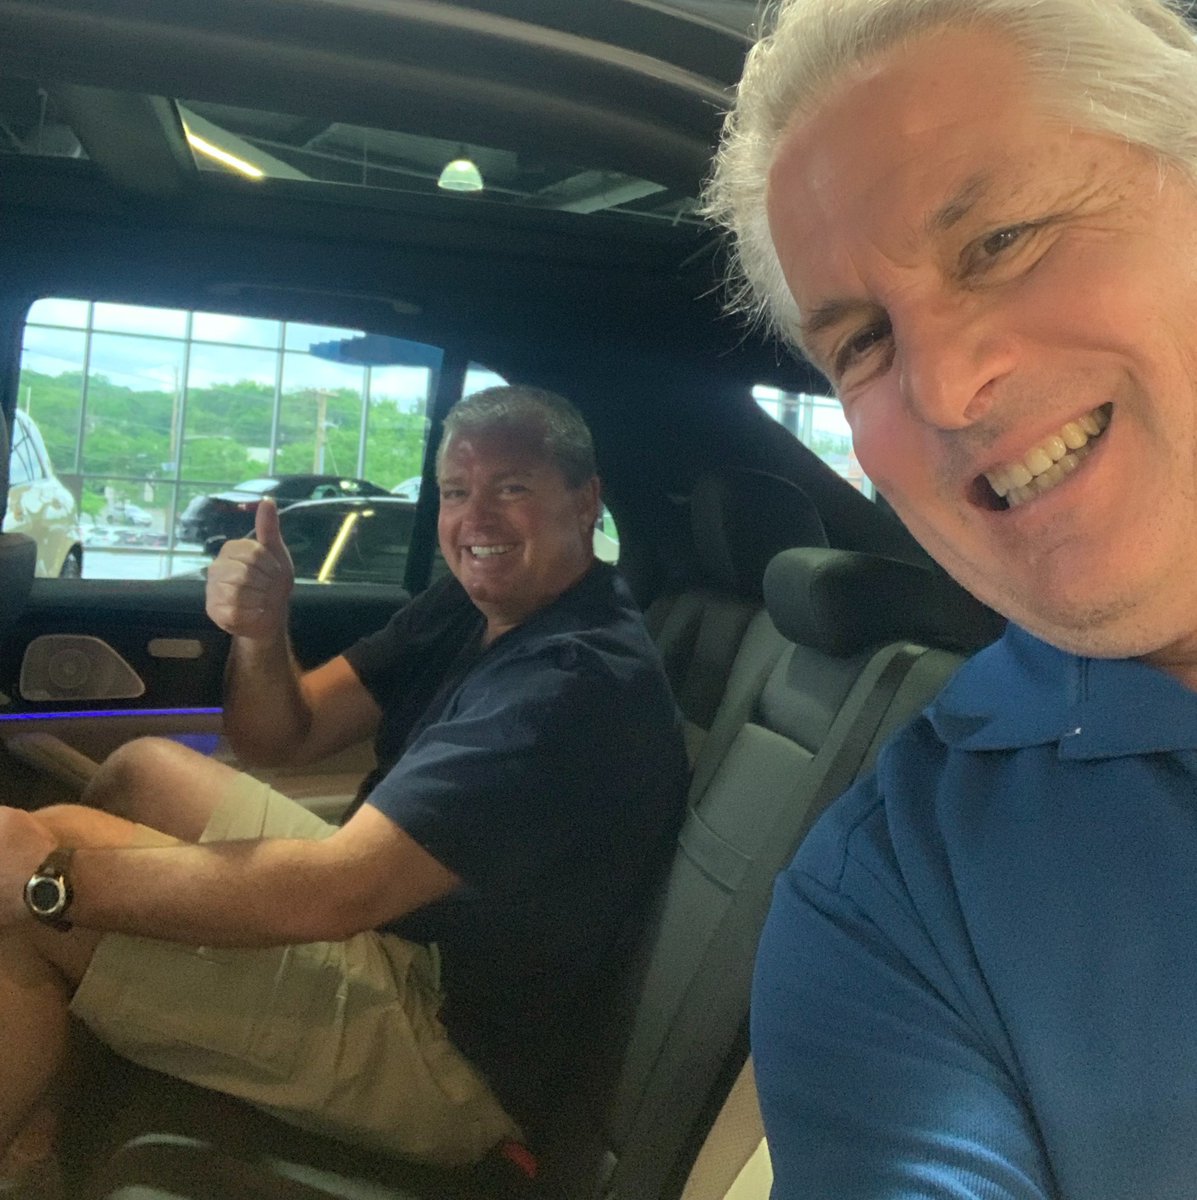 Capturing the excitement of a first-time Mercedes AMG buyer alongside our salesman Andrew! 🌟 Welcome to the AMG family, and thank you for trusting us with your dream car journey. 
.
.
.
#mercedesbenzofparamus #mbusa #BrandLoyalty #MercedesBenz #luxurycars #carshopping #paramusnj